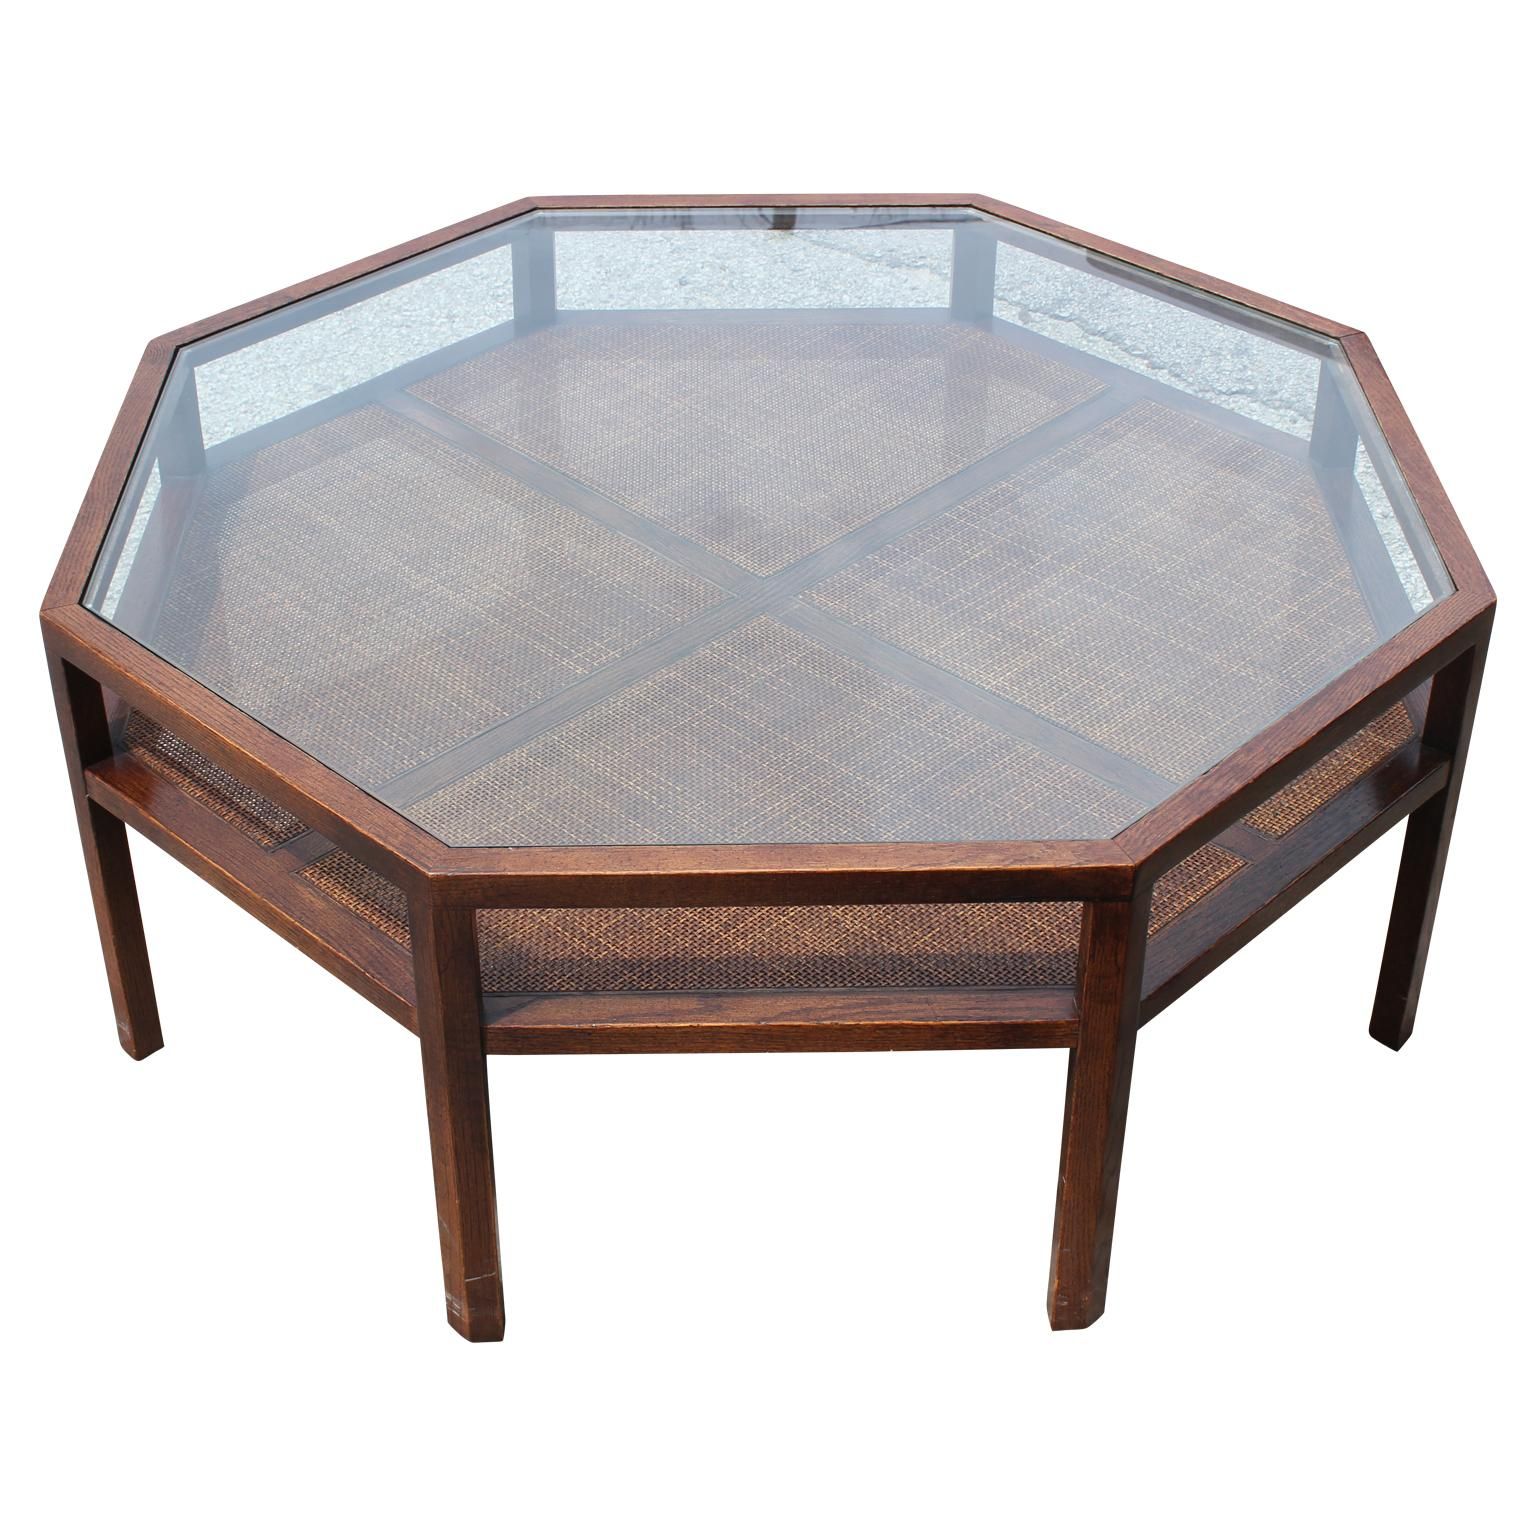 Modern Octagon Or Round Walnut Coffee Table With Glass Top At 1stdibs Within Octagon Glass Top Coffee Tables (View 6 of 20)